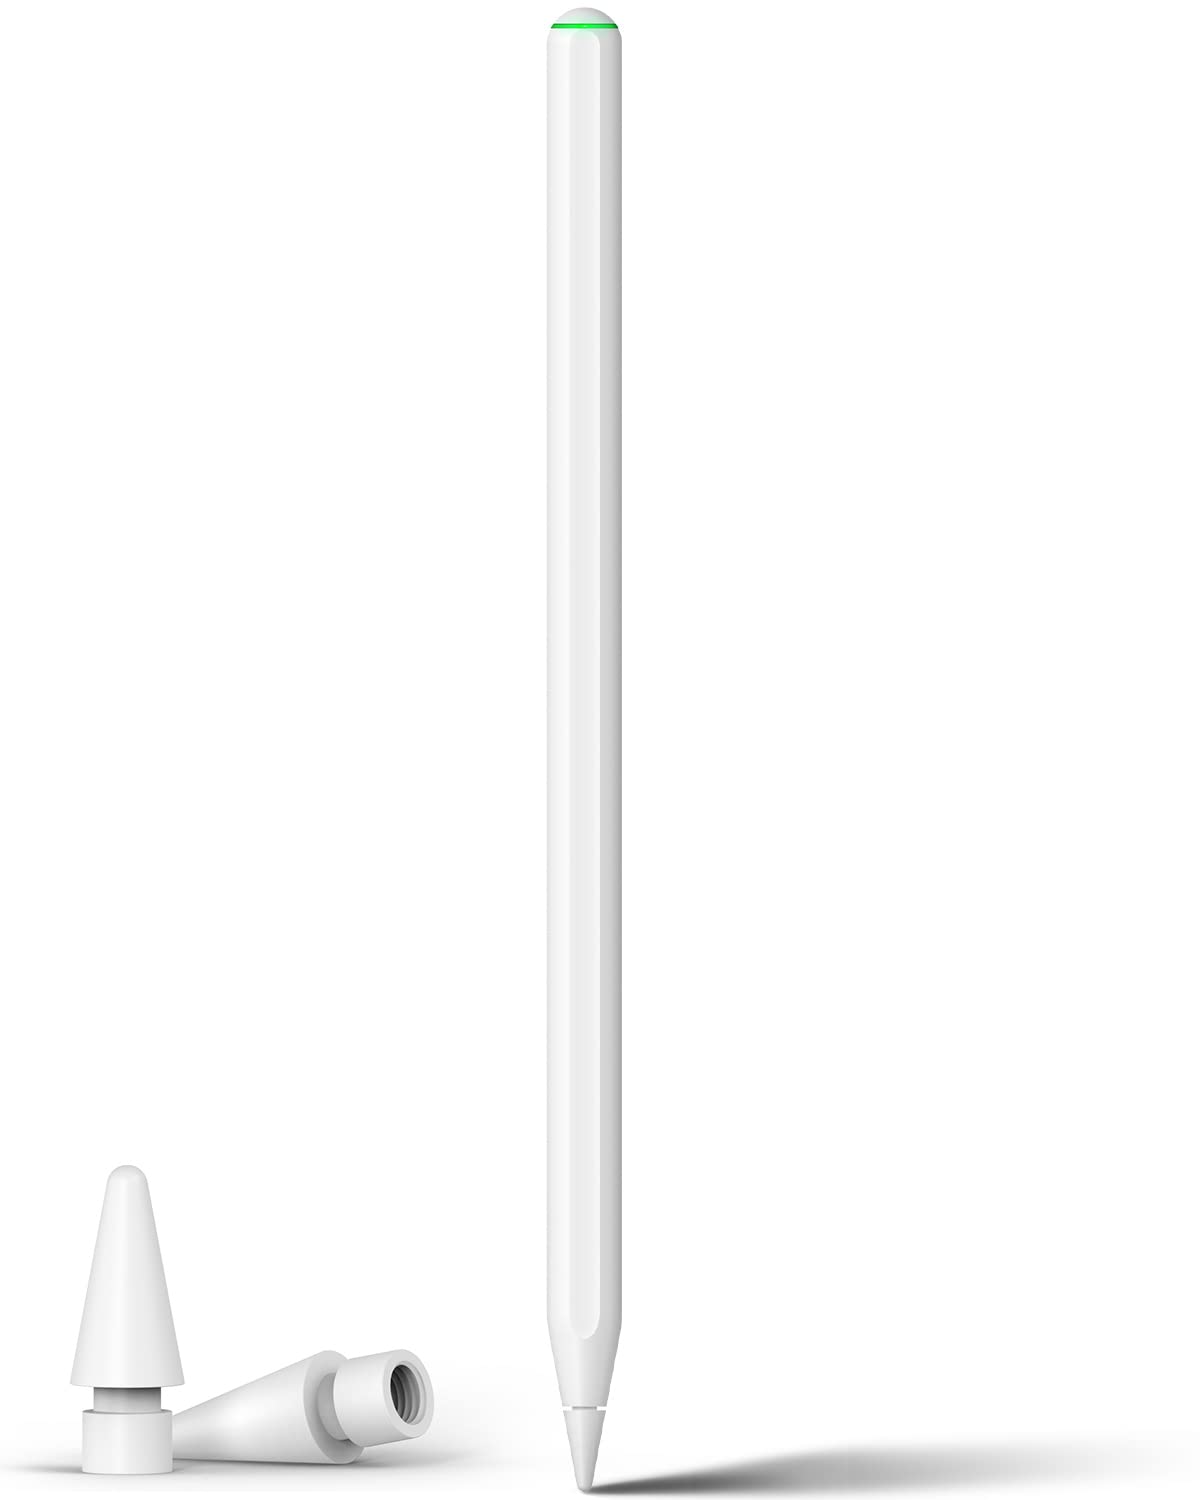 Stylus Pen, Magnetic Wireless Charging Pencil 2nd Gen with Palm Rejection & Tilt, Compatible with Apple iPad Pro 11 in 1/2/3/4, iPad Pro 12.9 in 3/4/5/6, iPad Air 4/5, iPad Mini 6 (White)